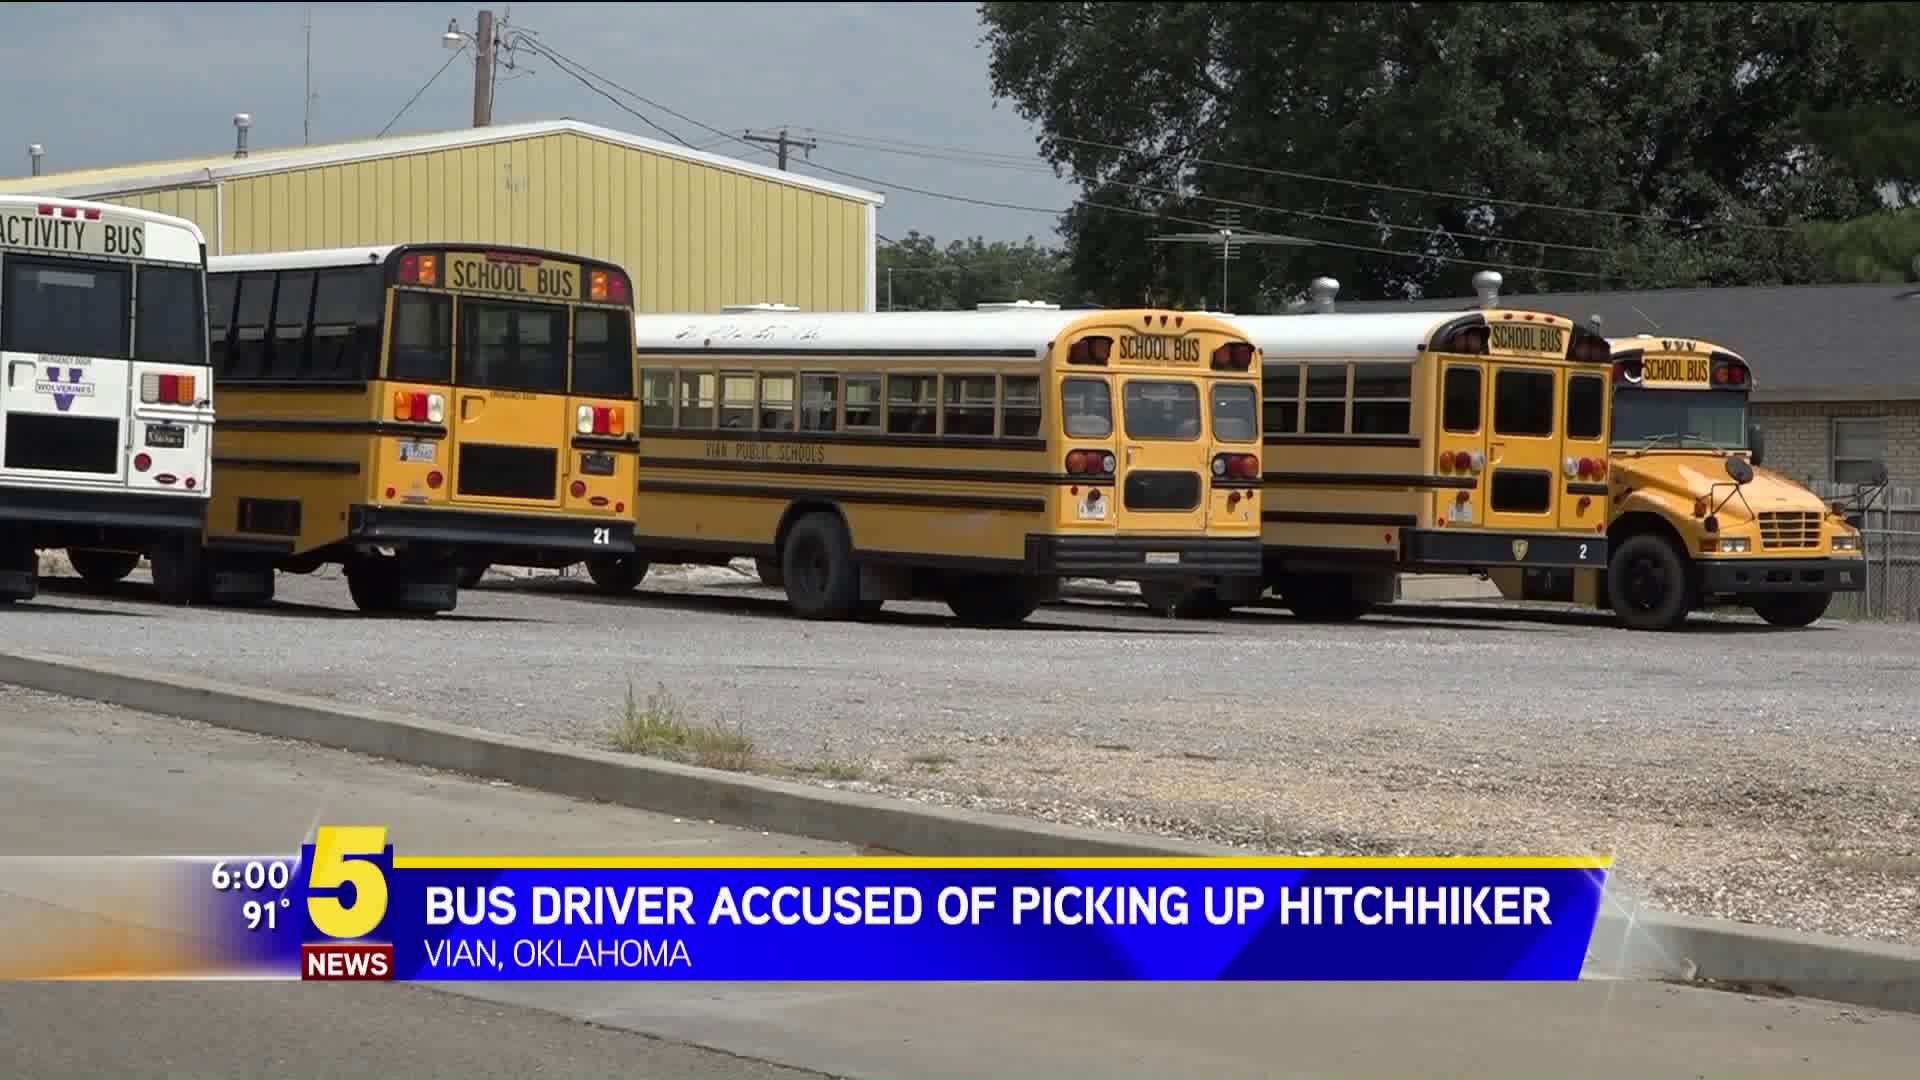 Bus Driver Accused Of Picking Up Hitchhiker